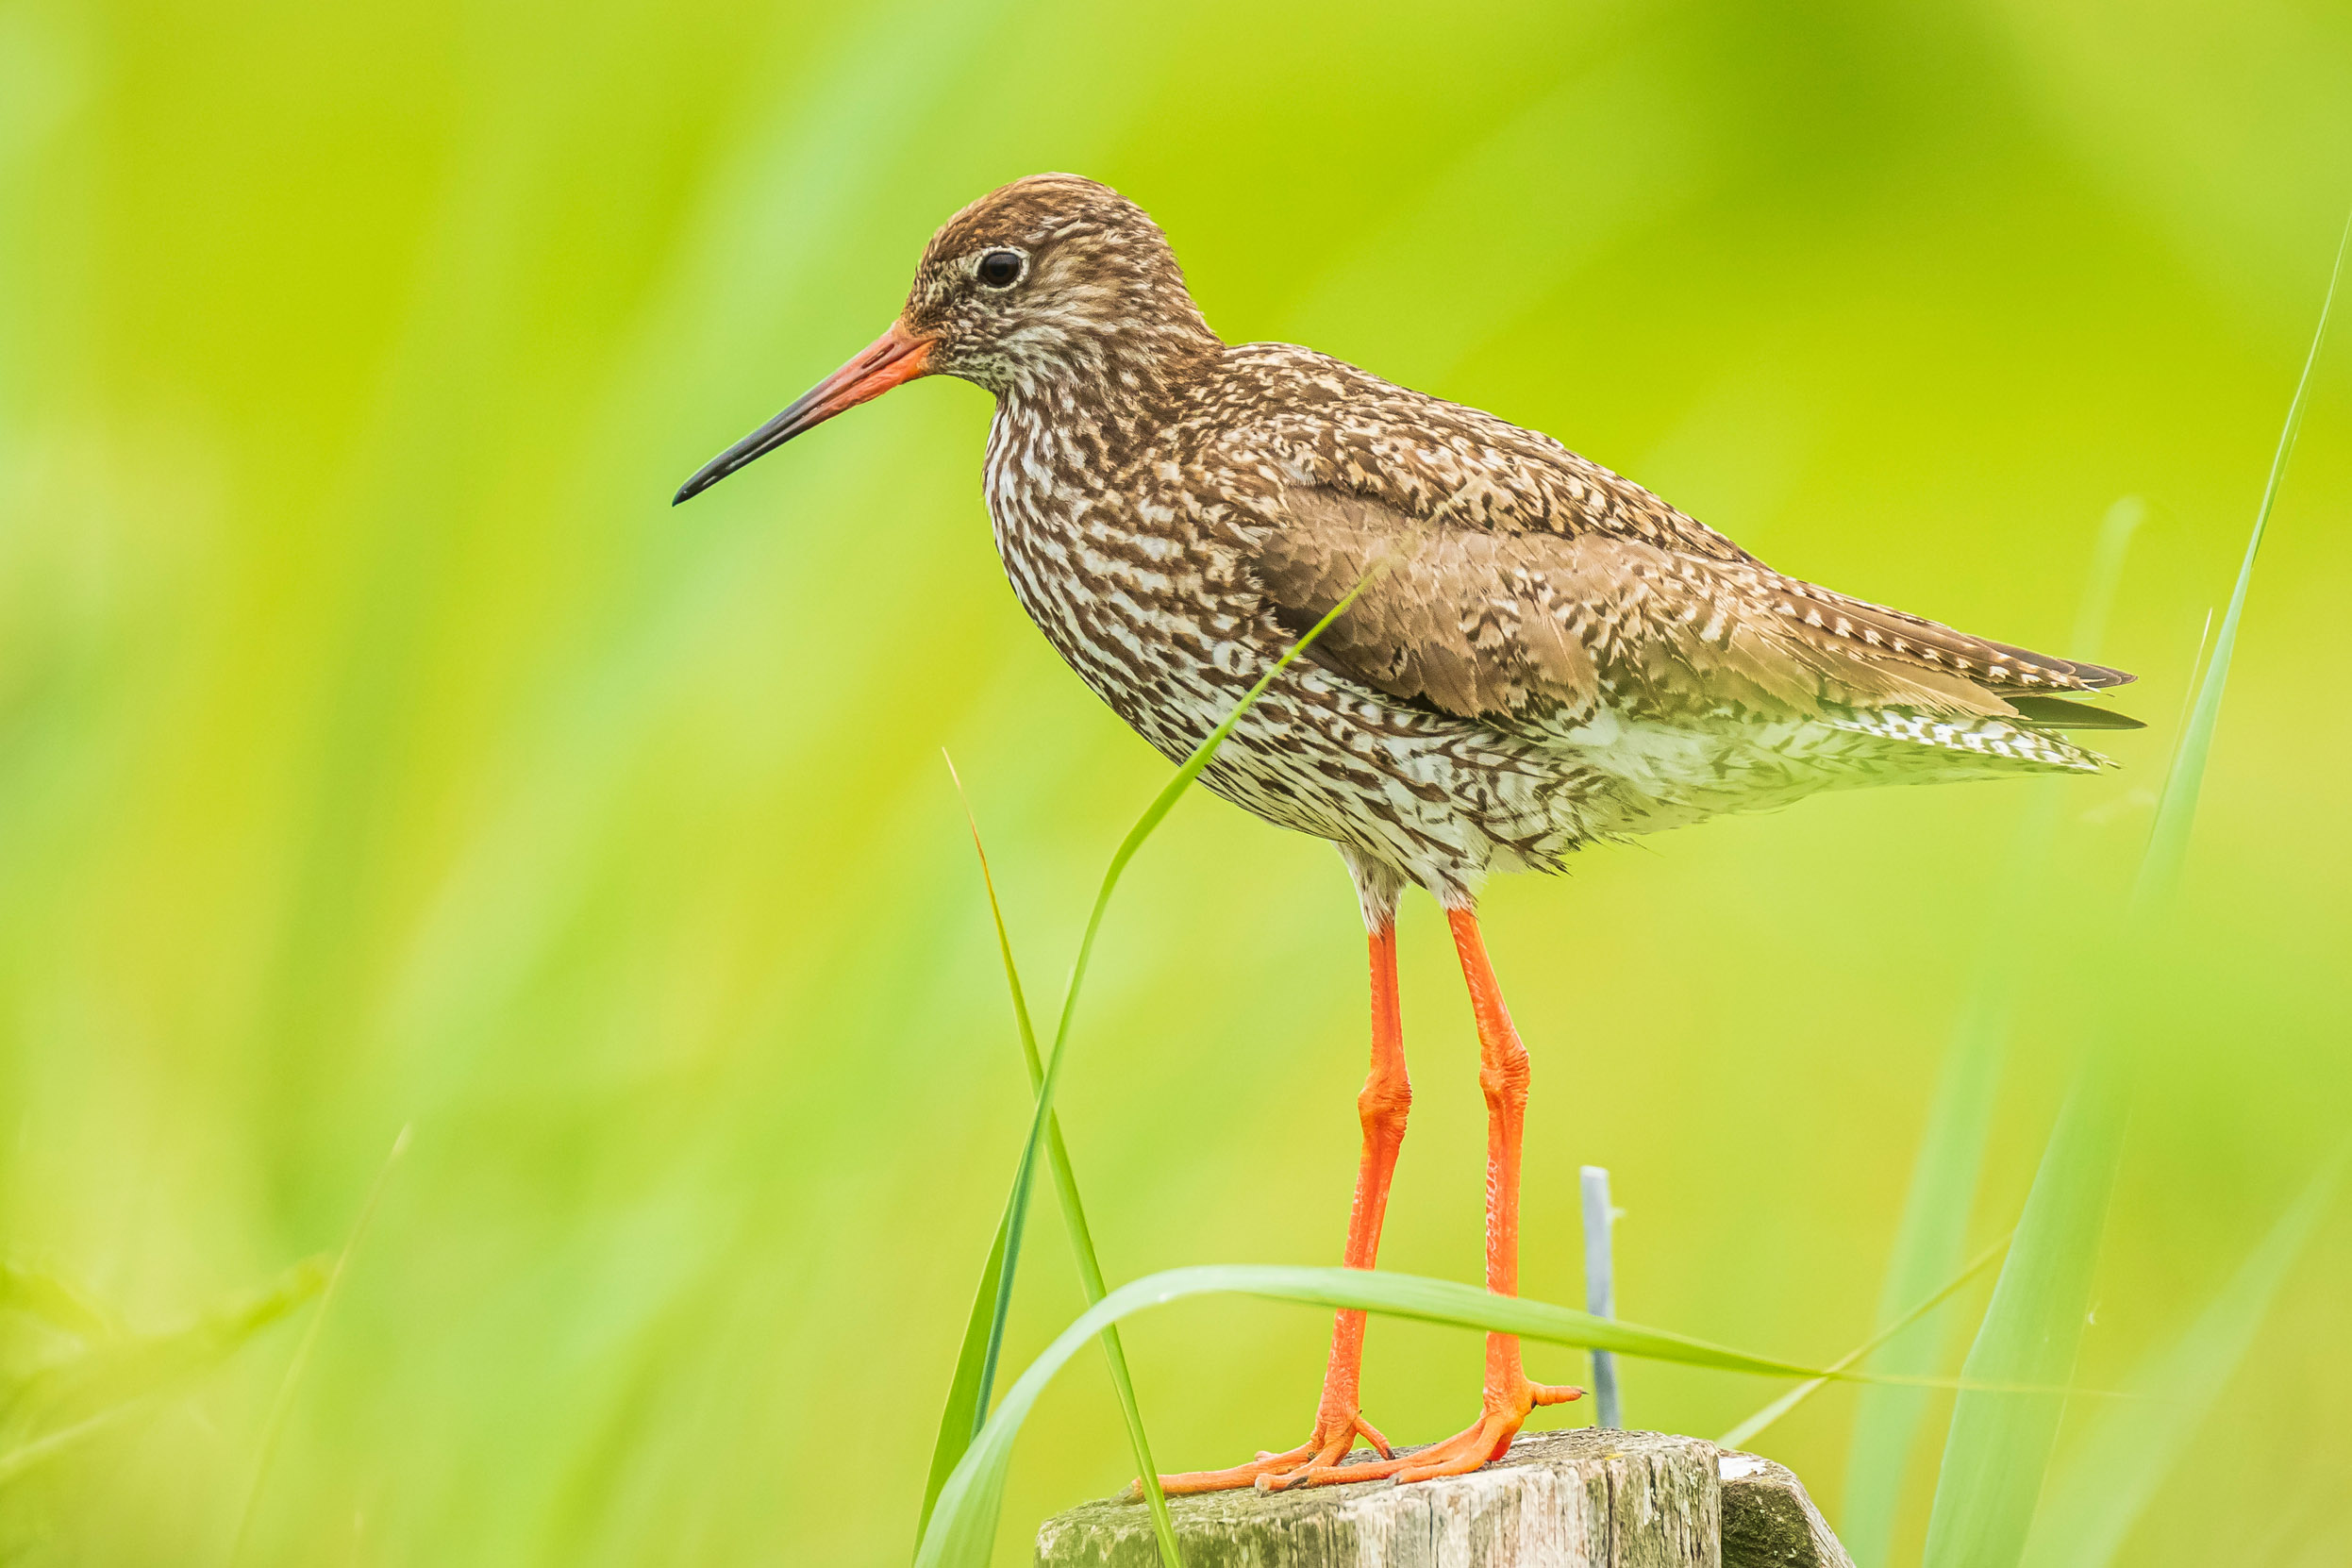 A Common Redshank perched on a wooden post surrounded by grassland.